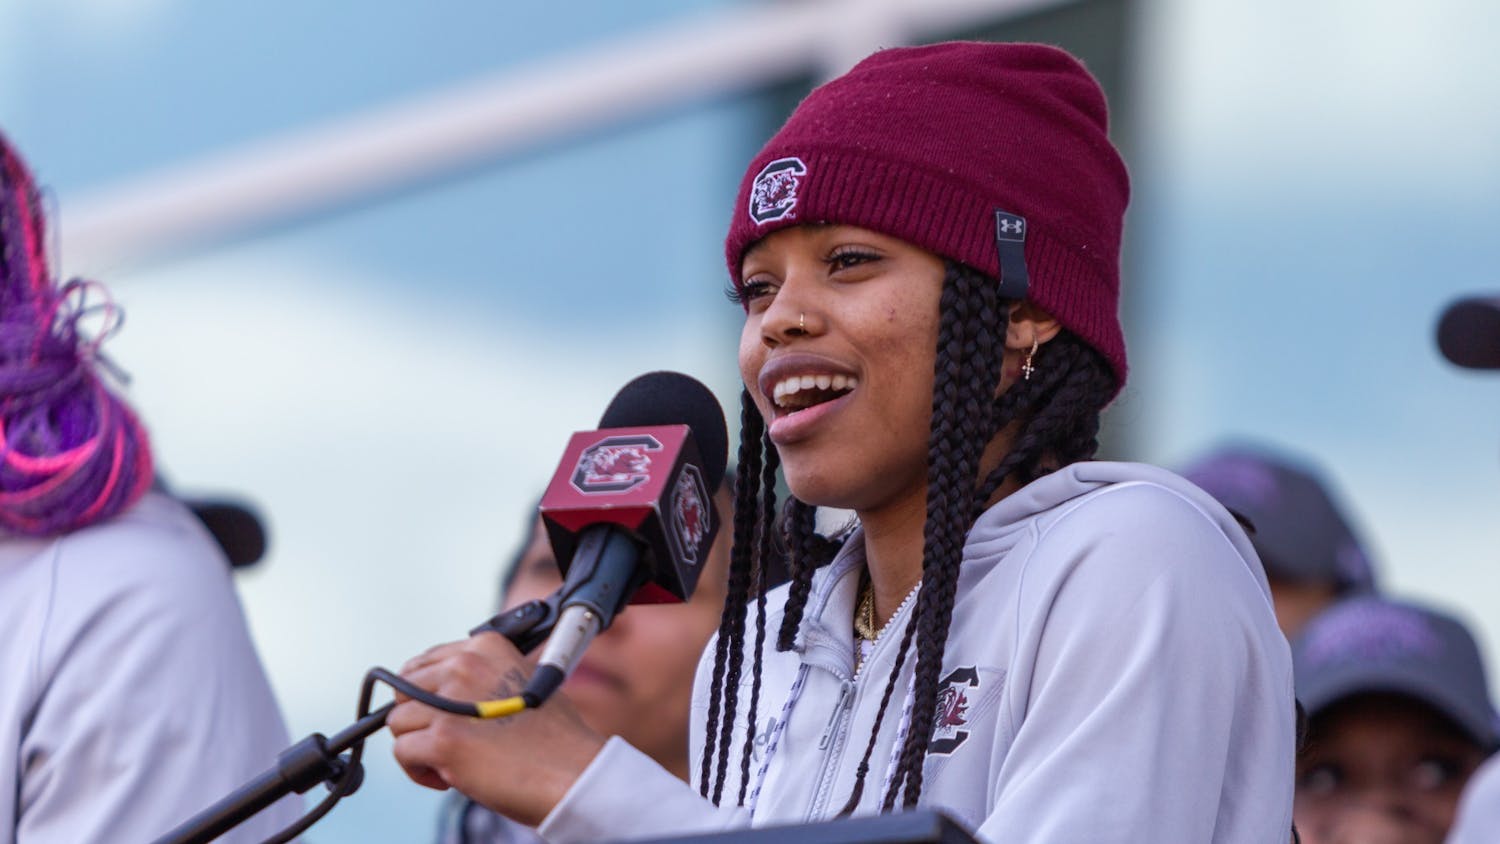 Senior guard Destanni Henderson speaks to fans in Columbia, SC on April 4, 2022. Fans lined the streets outside of Colonial Life Arena to welcome the team back to Columbia following their victory over the University of Connecticut to claim the NCAA national title.